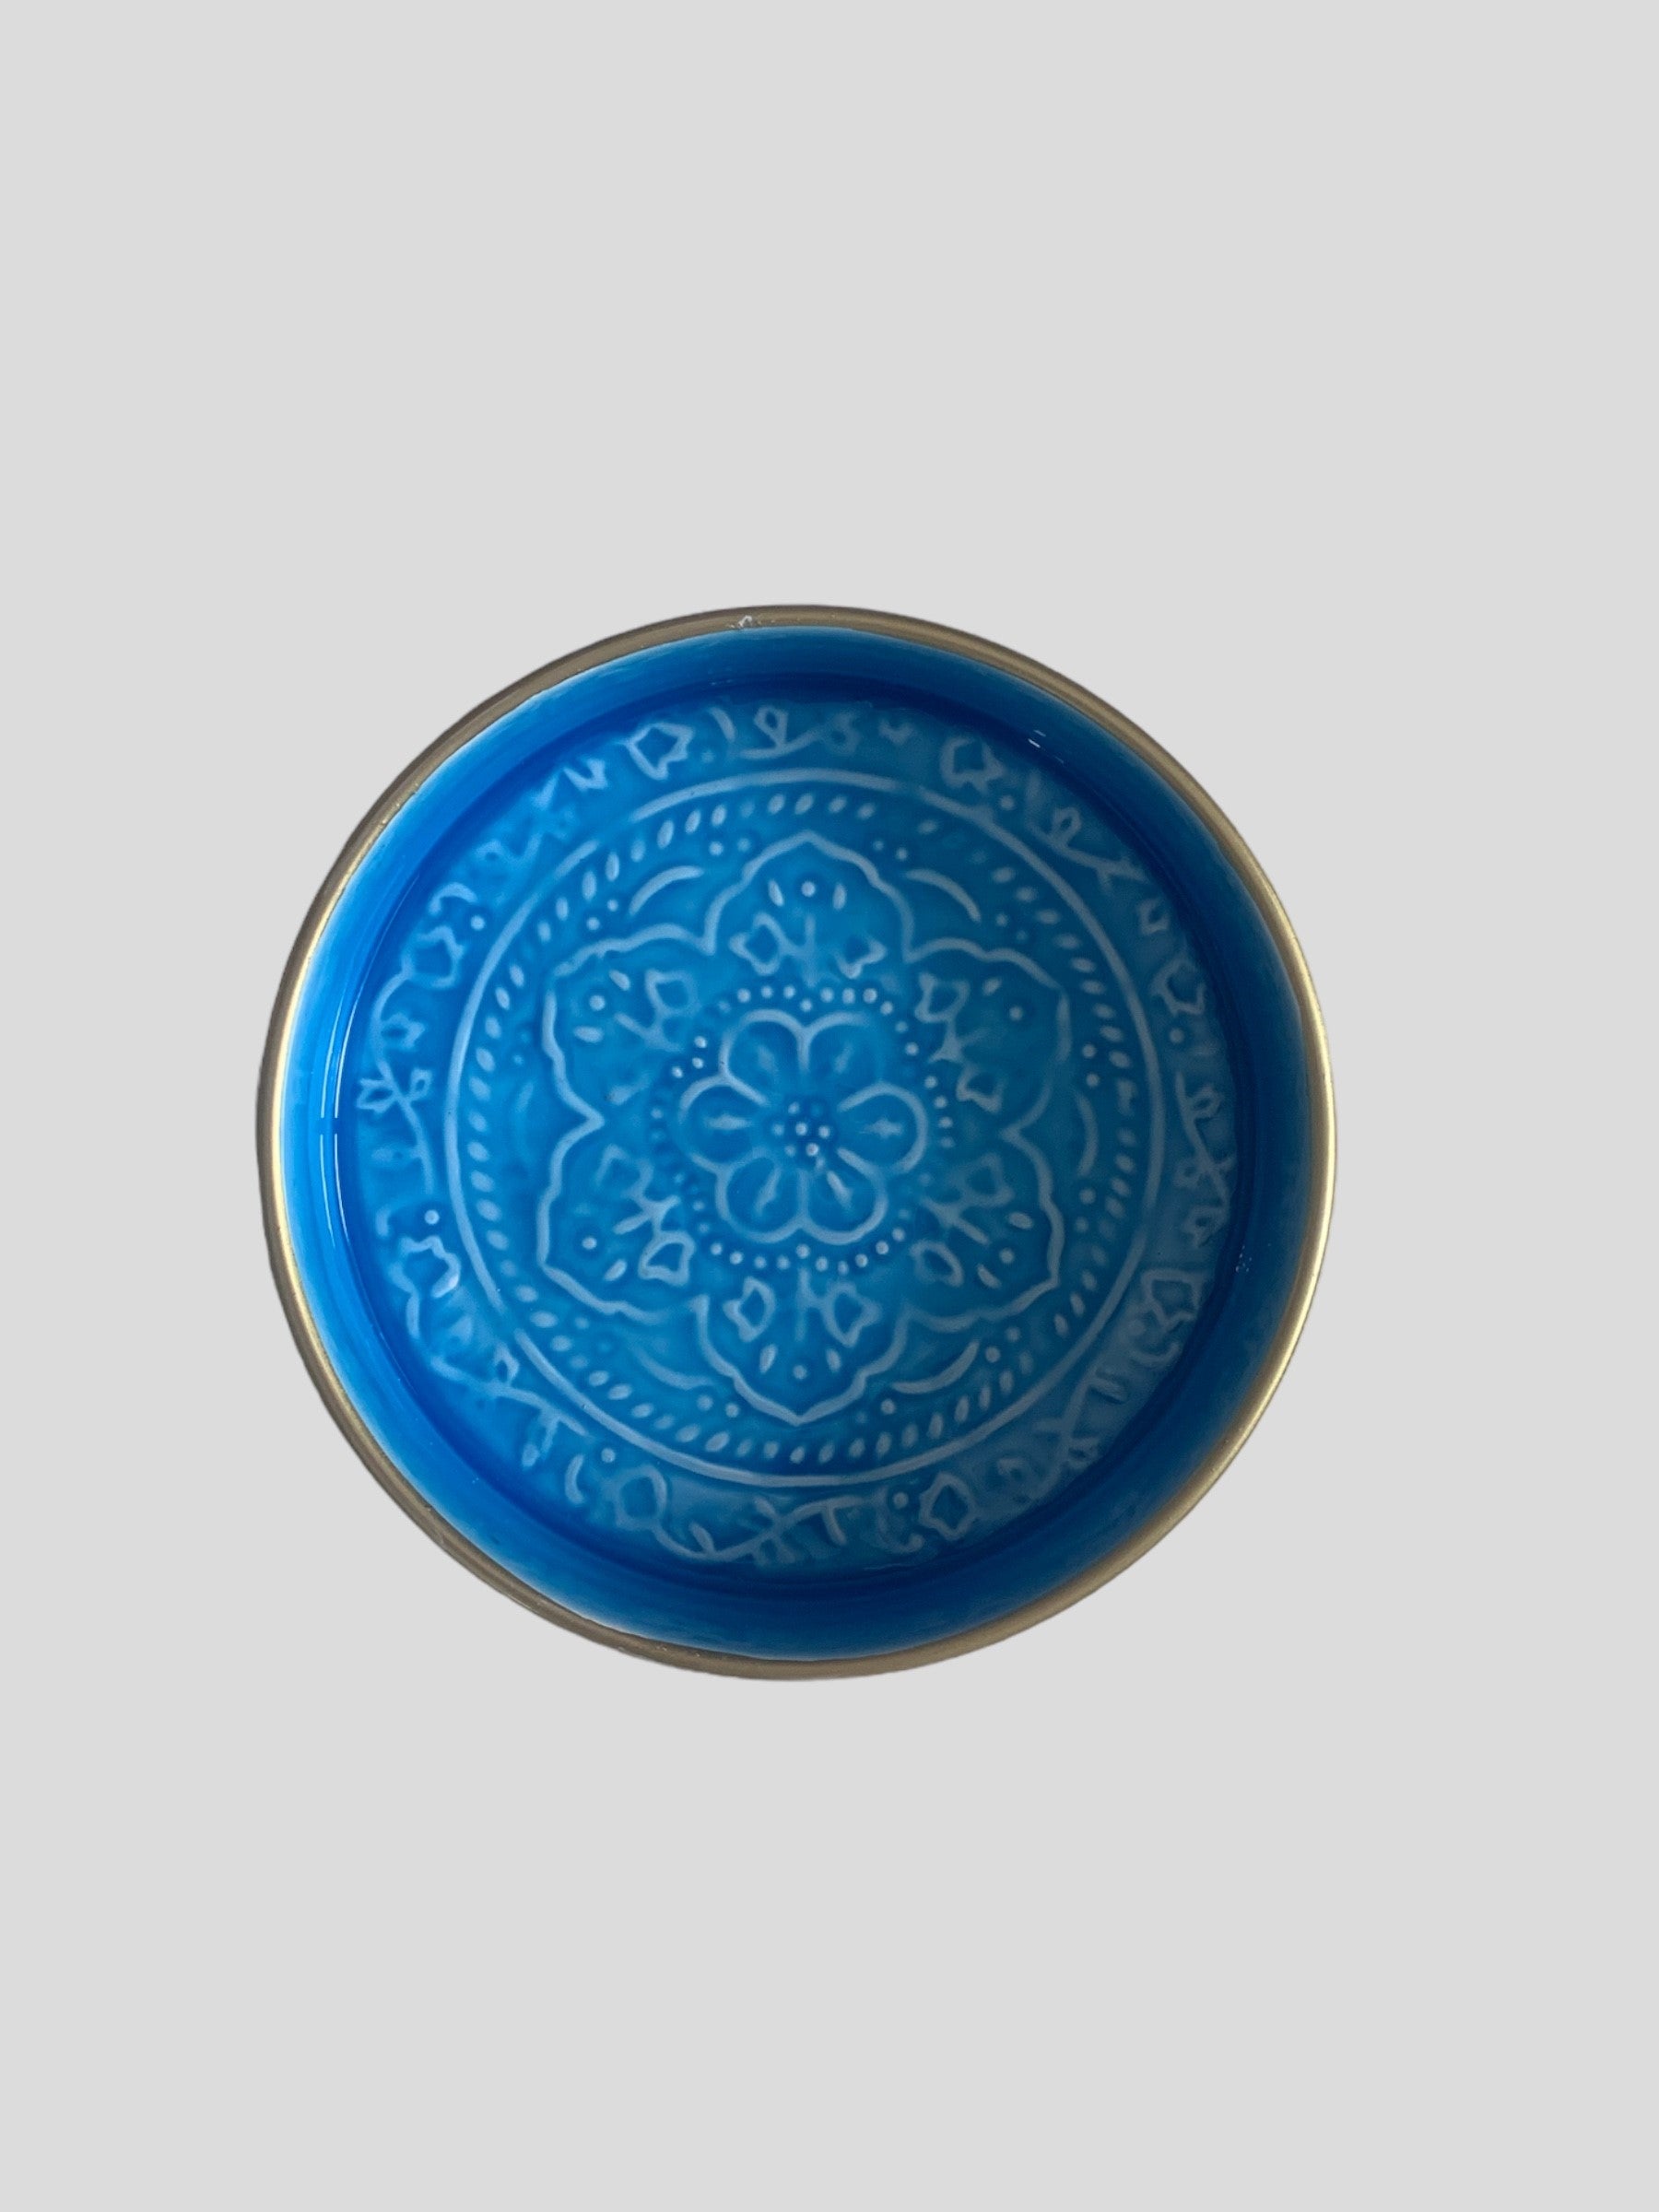 A mini blue enamel tray with floral embossing detail.